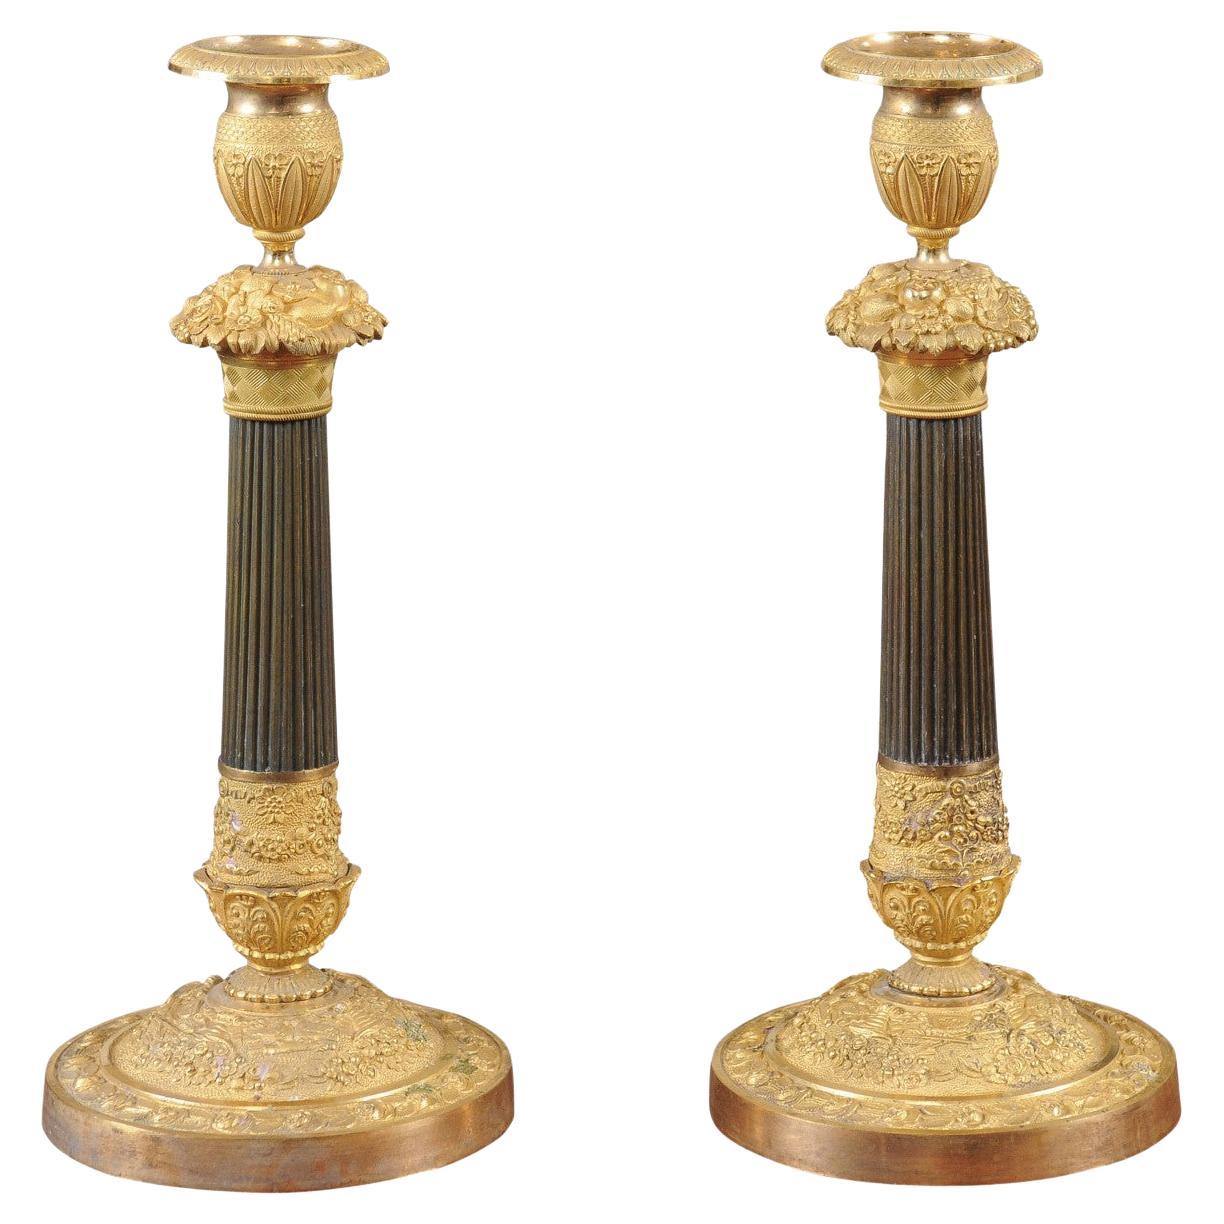 Pair of Bronze Dore Candlesticks with Foliage Design, Early 19th Century France For Sale